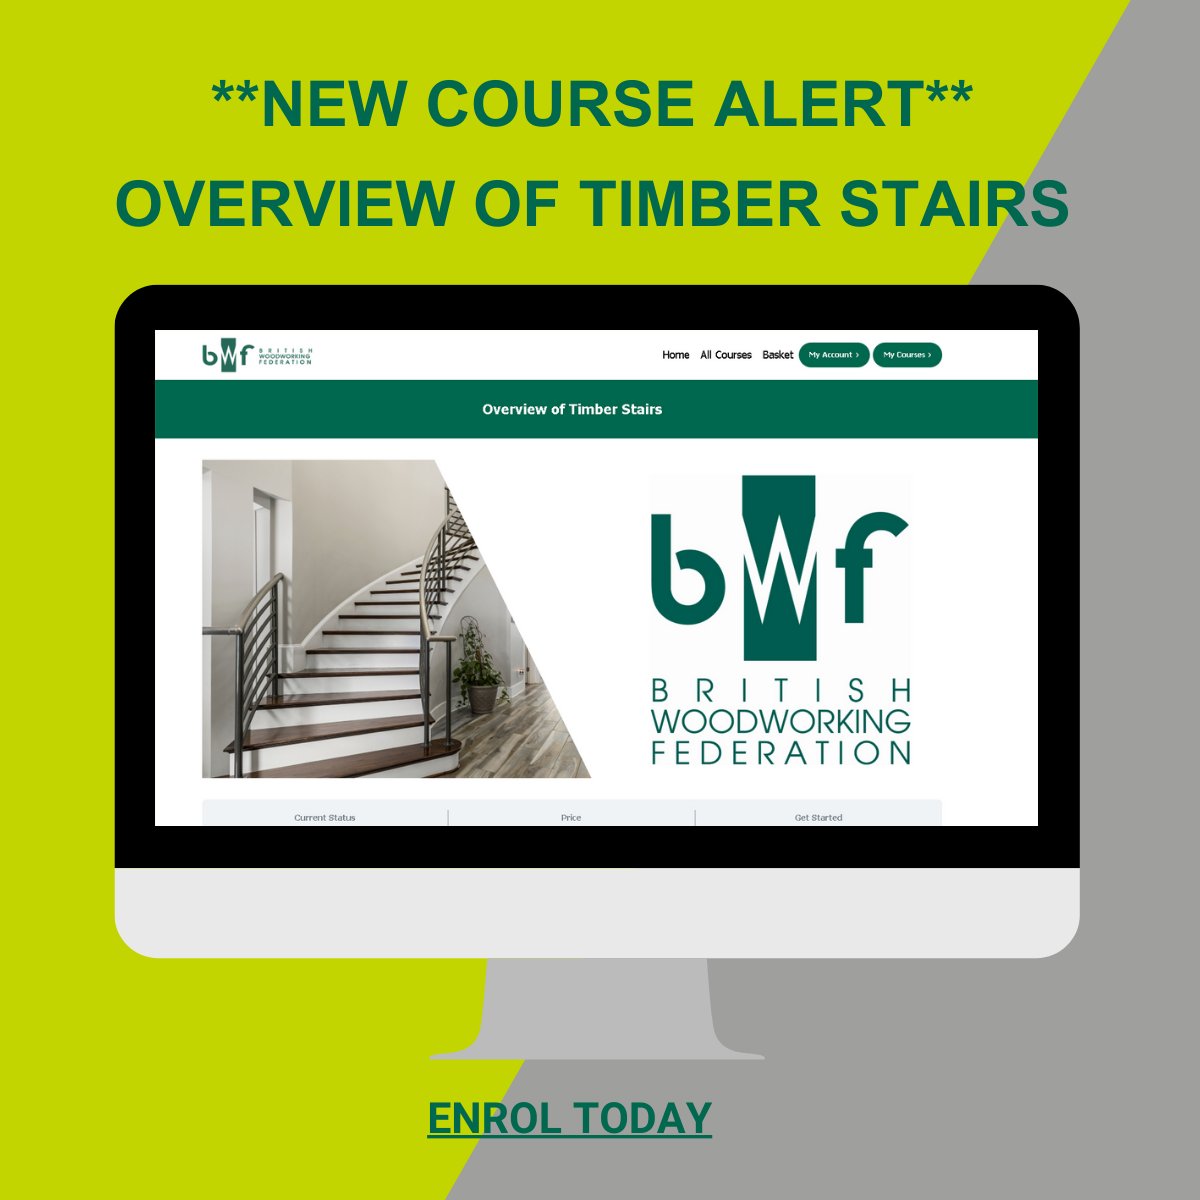 The BWF has recently released it’s new 'Overview of Timber Stairs e-learning course,' which has been officially certified by the CPD Certification Service. CLICK HERE lnkd.in/euu4Ap7n to register today. This course is FREE to BWF Members lnkd.in/dKxiipv